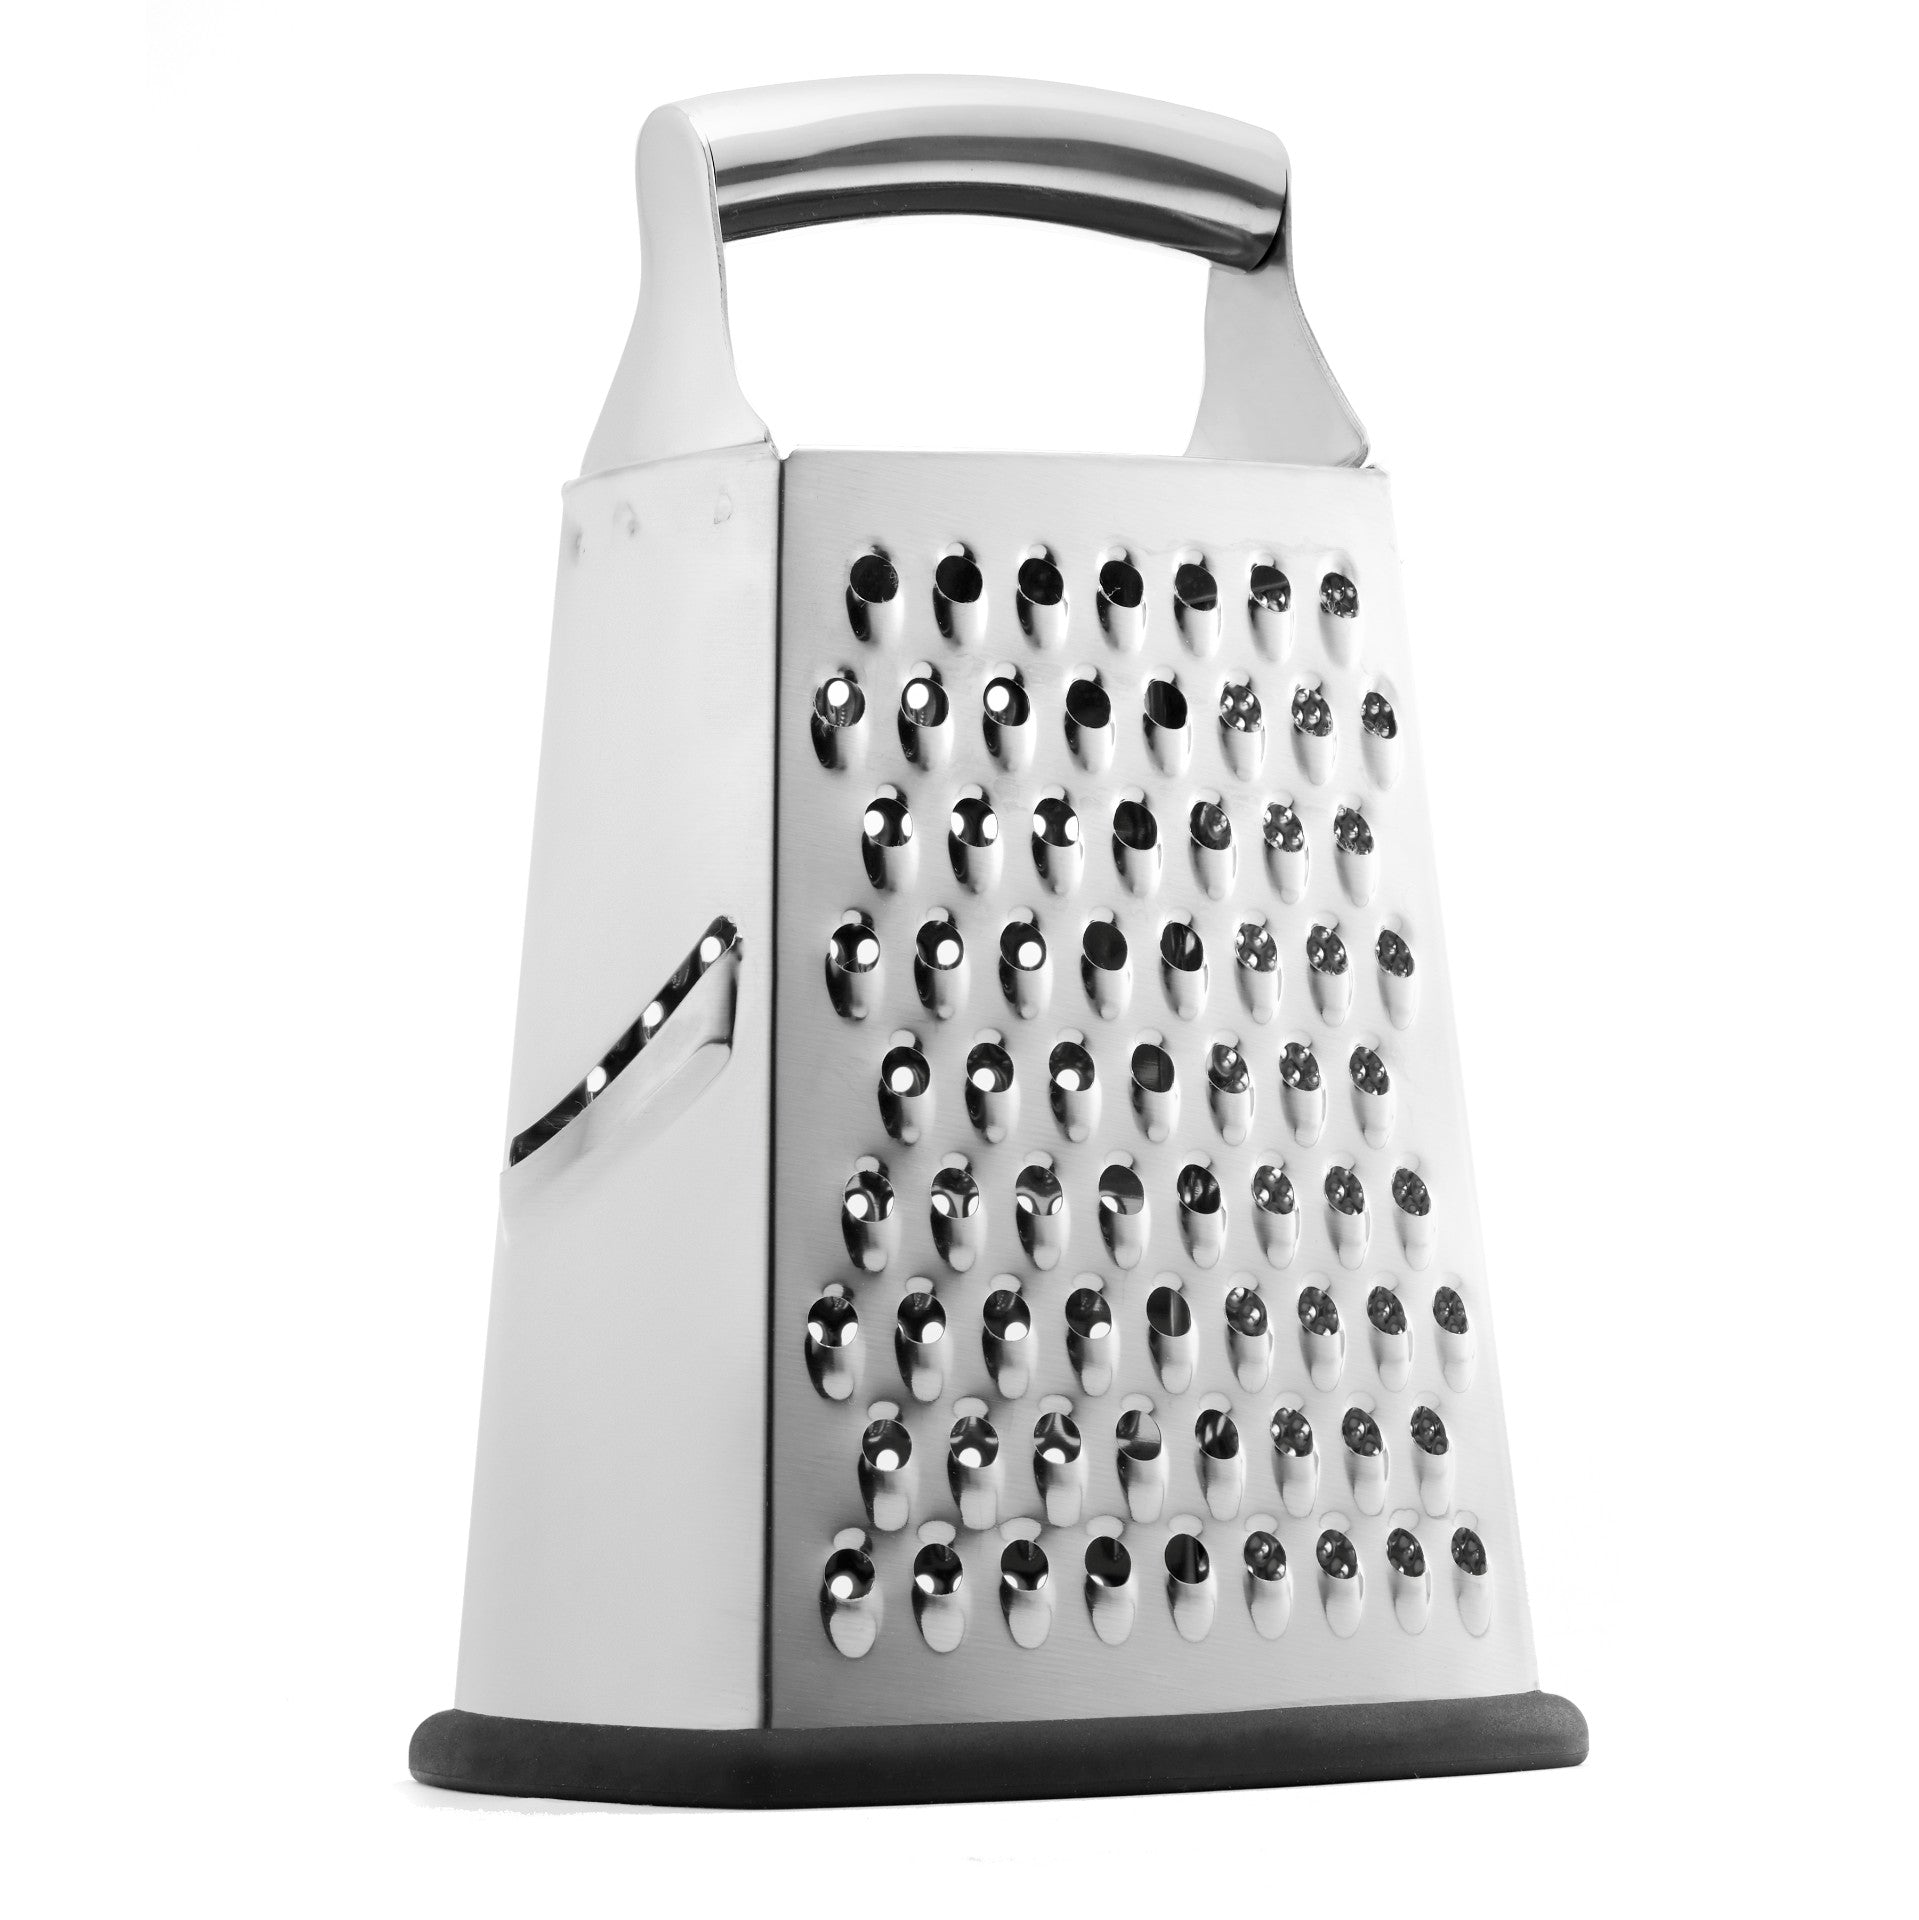 Professional Box Graters with Container, Stainless Steel 4 Sides, Kitchen Slicer Shredder Grater for Parmesan Cheese, Vegetables, Ginger, Yellow